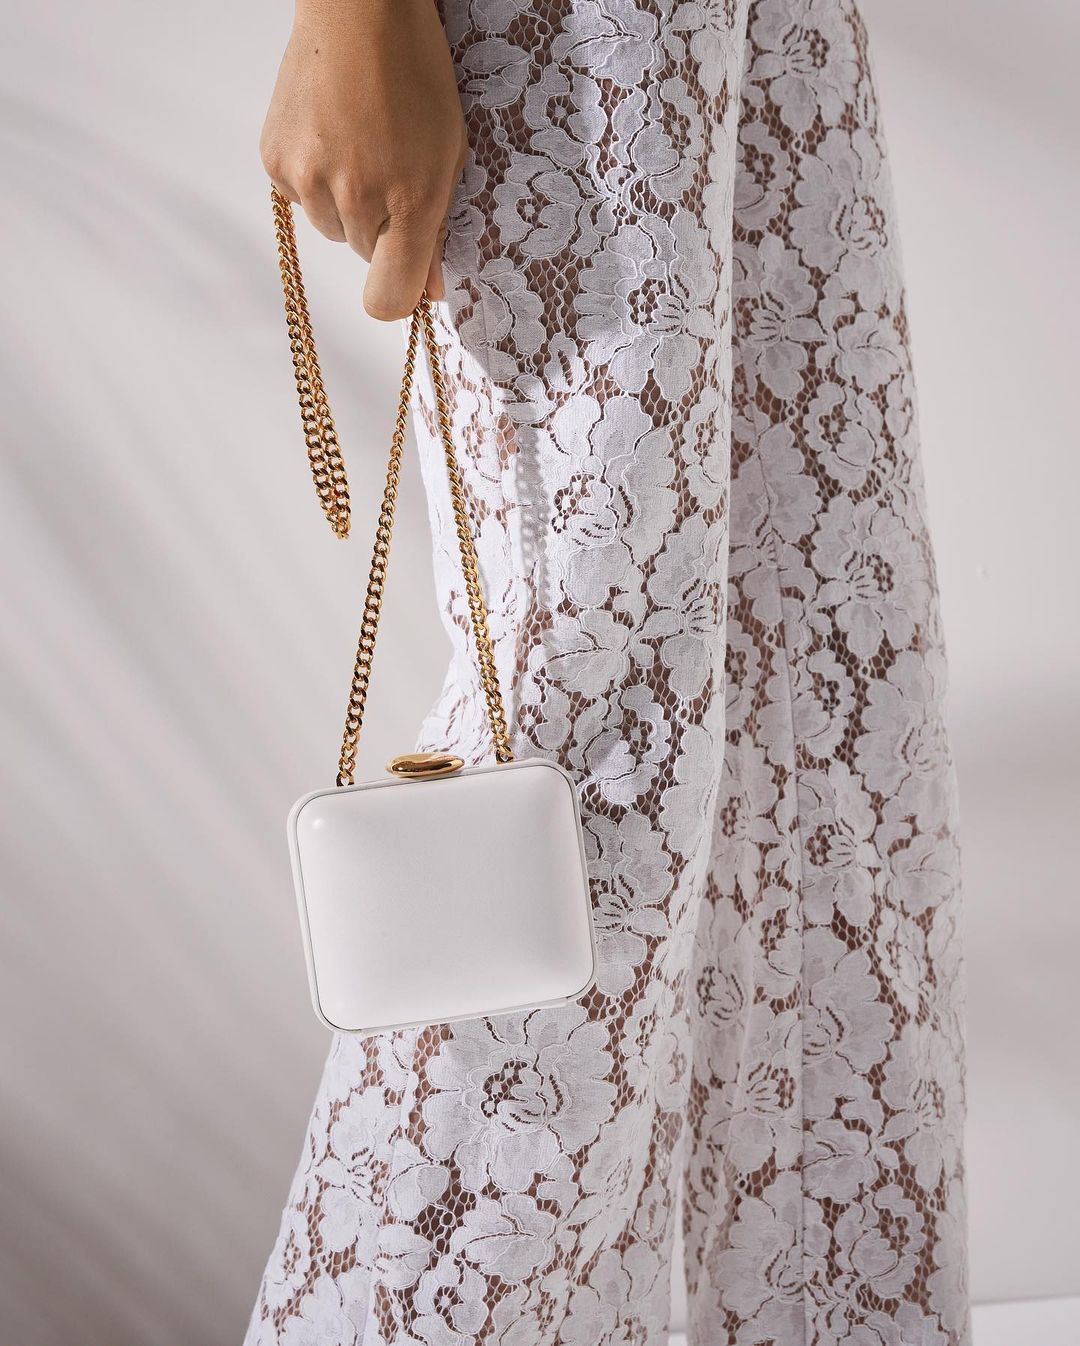 close-up image of a model wearing white lace pants and holding a white clutch with a gold chain